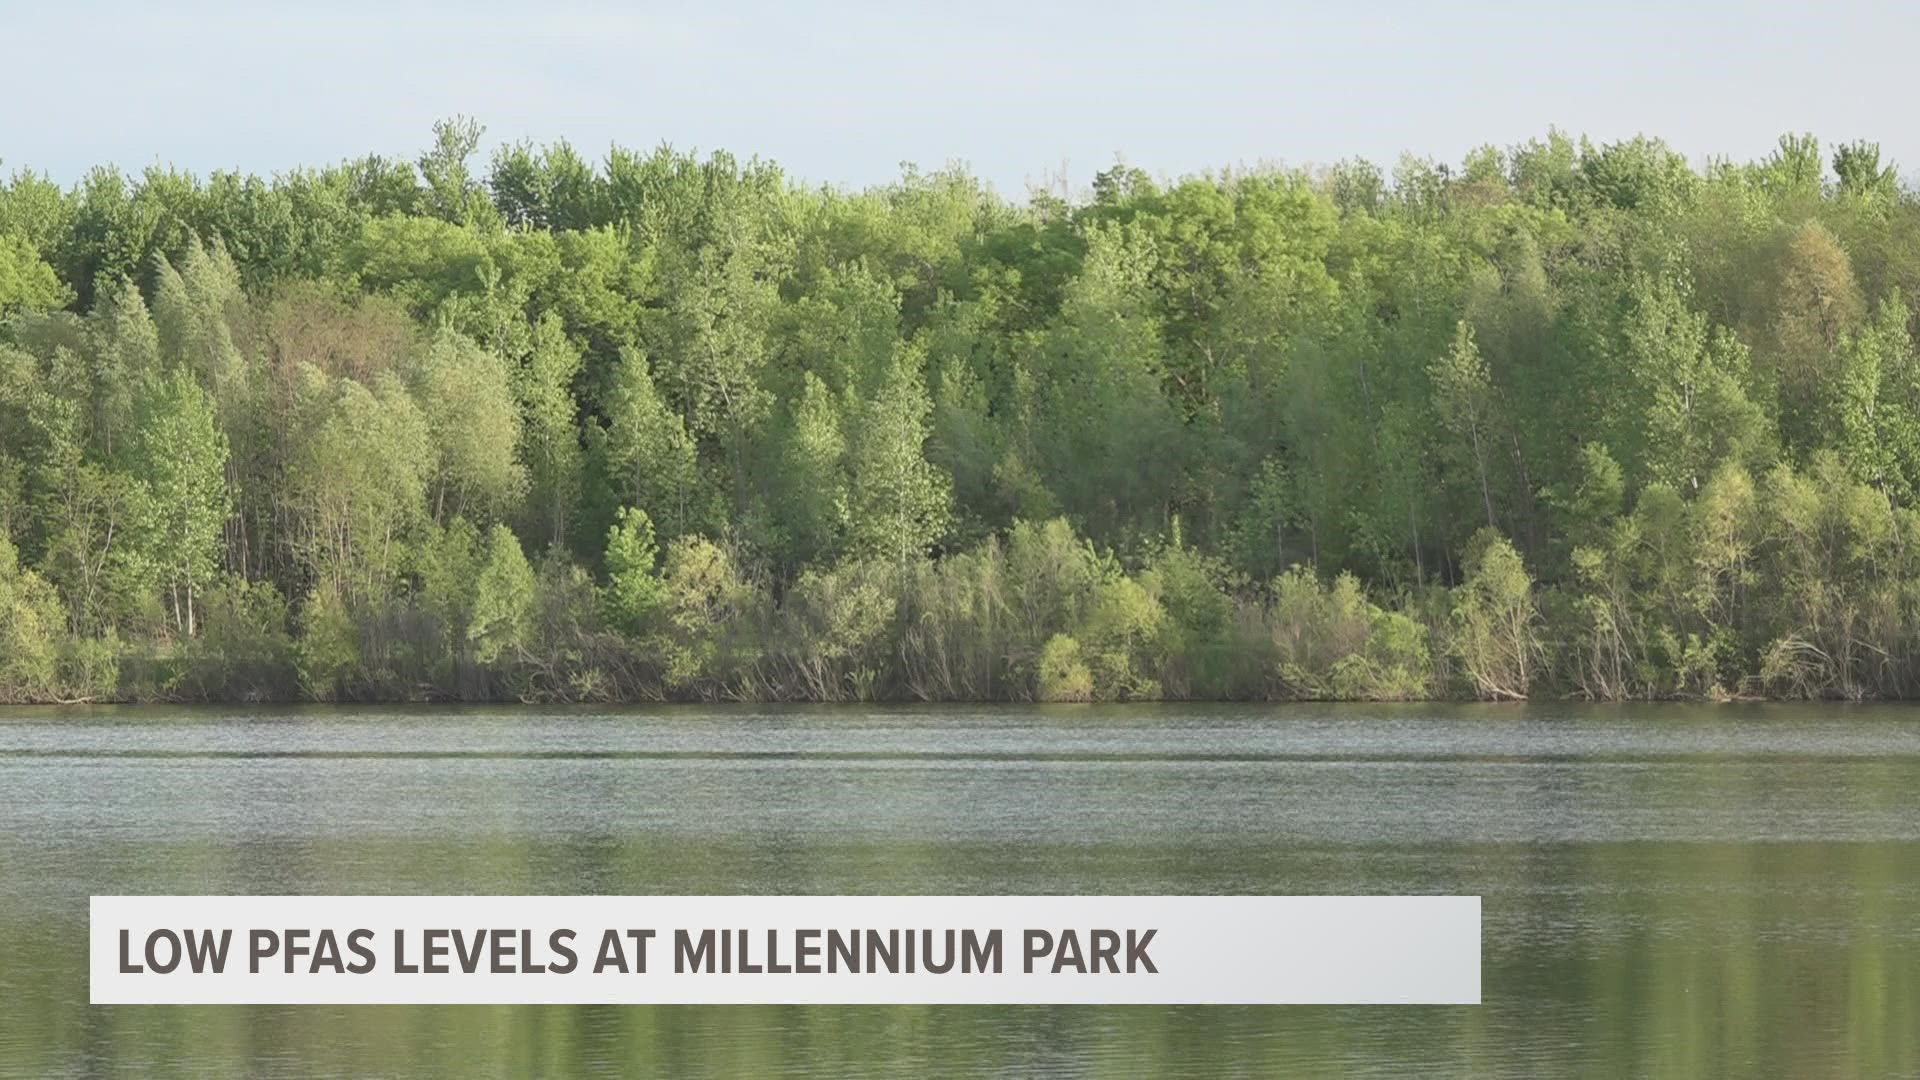 The PFAS was discovered in a test conducted in 2021 from the former Riverside Sand and Gravel Landfill that's now part of the park.